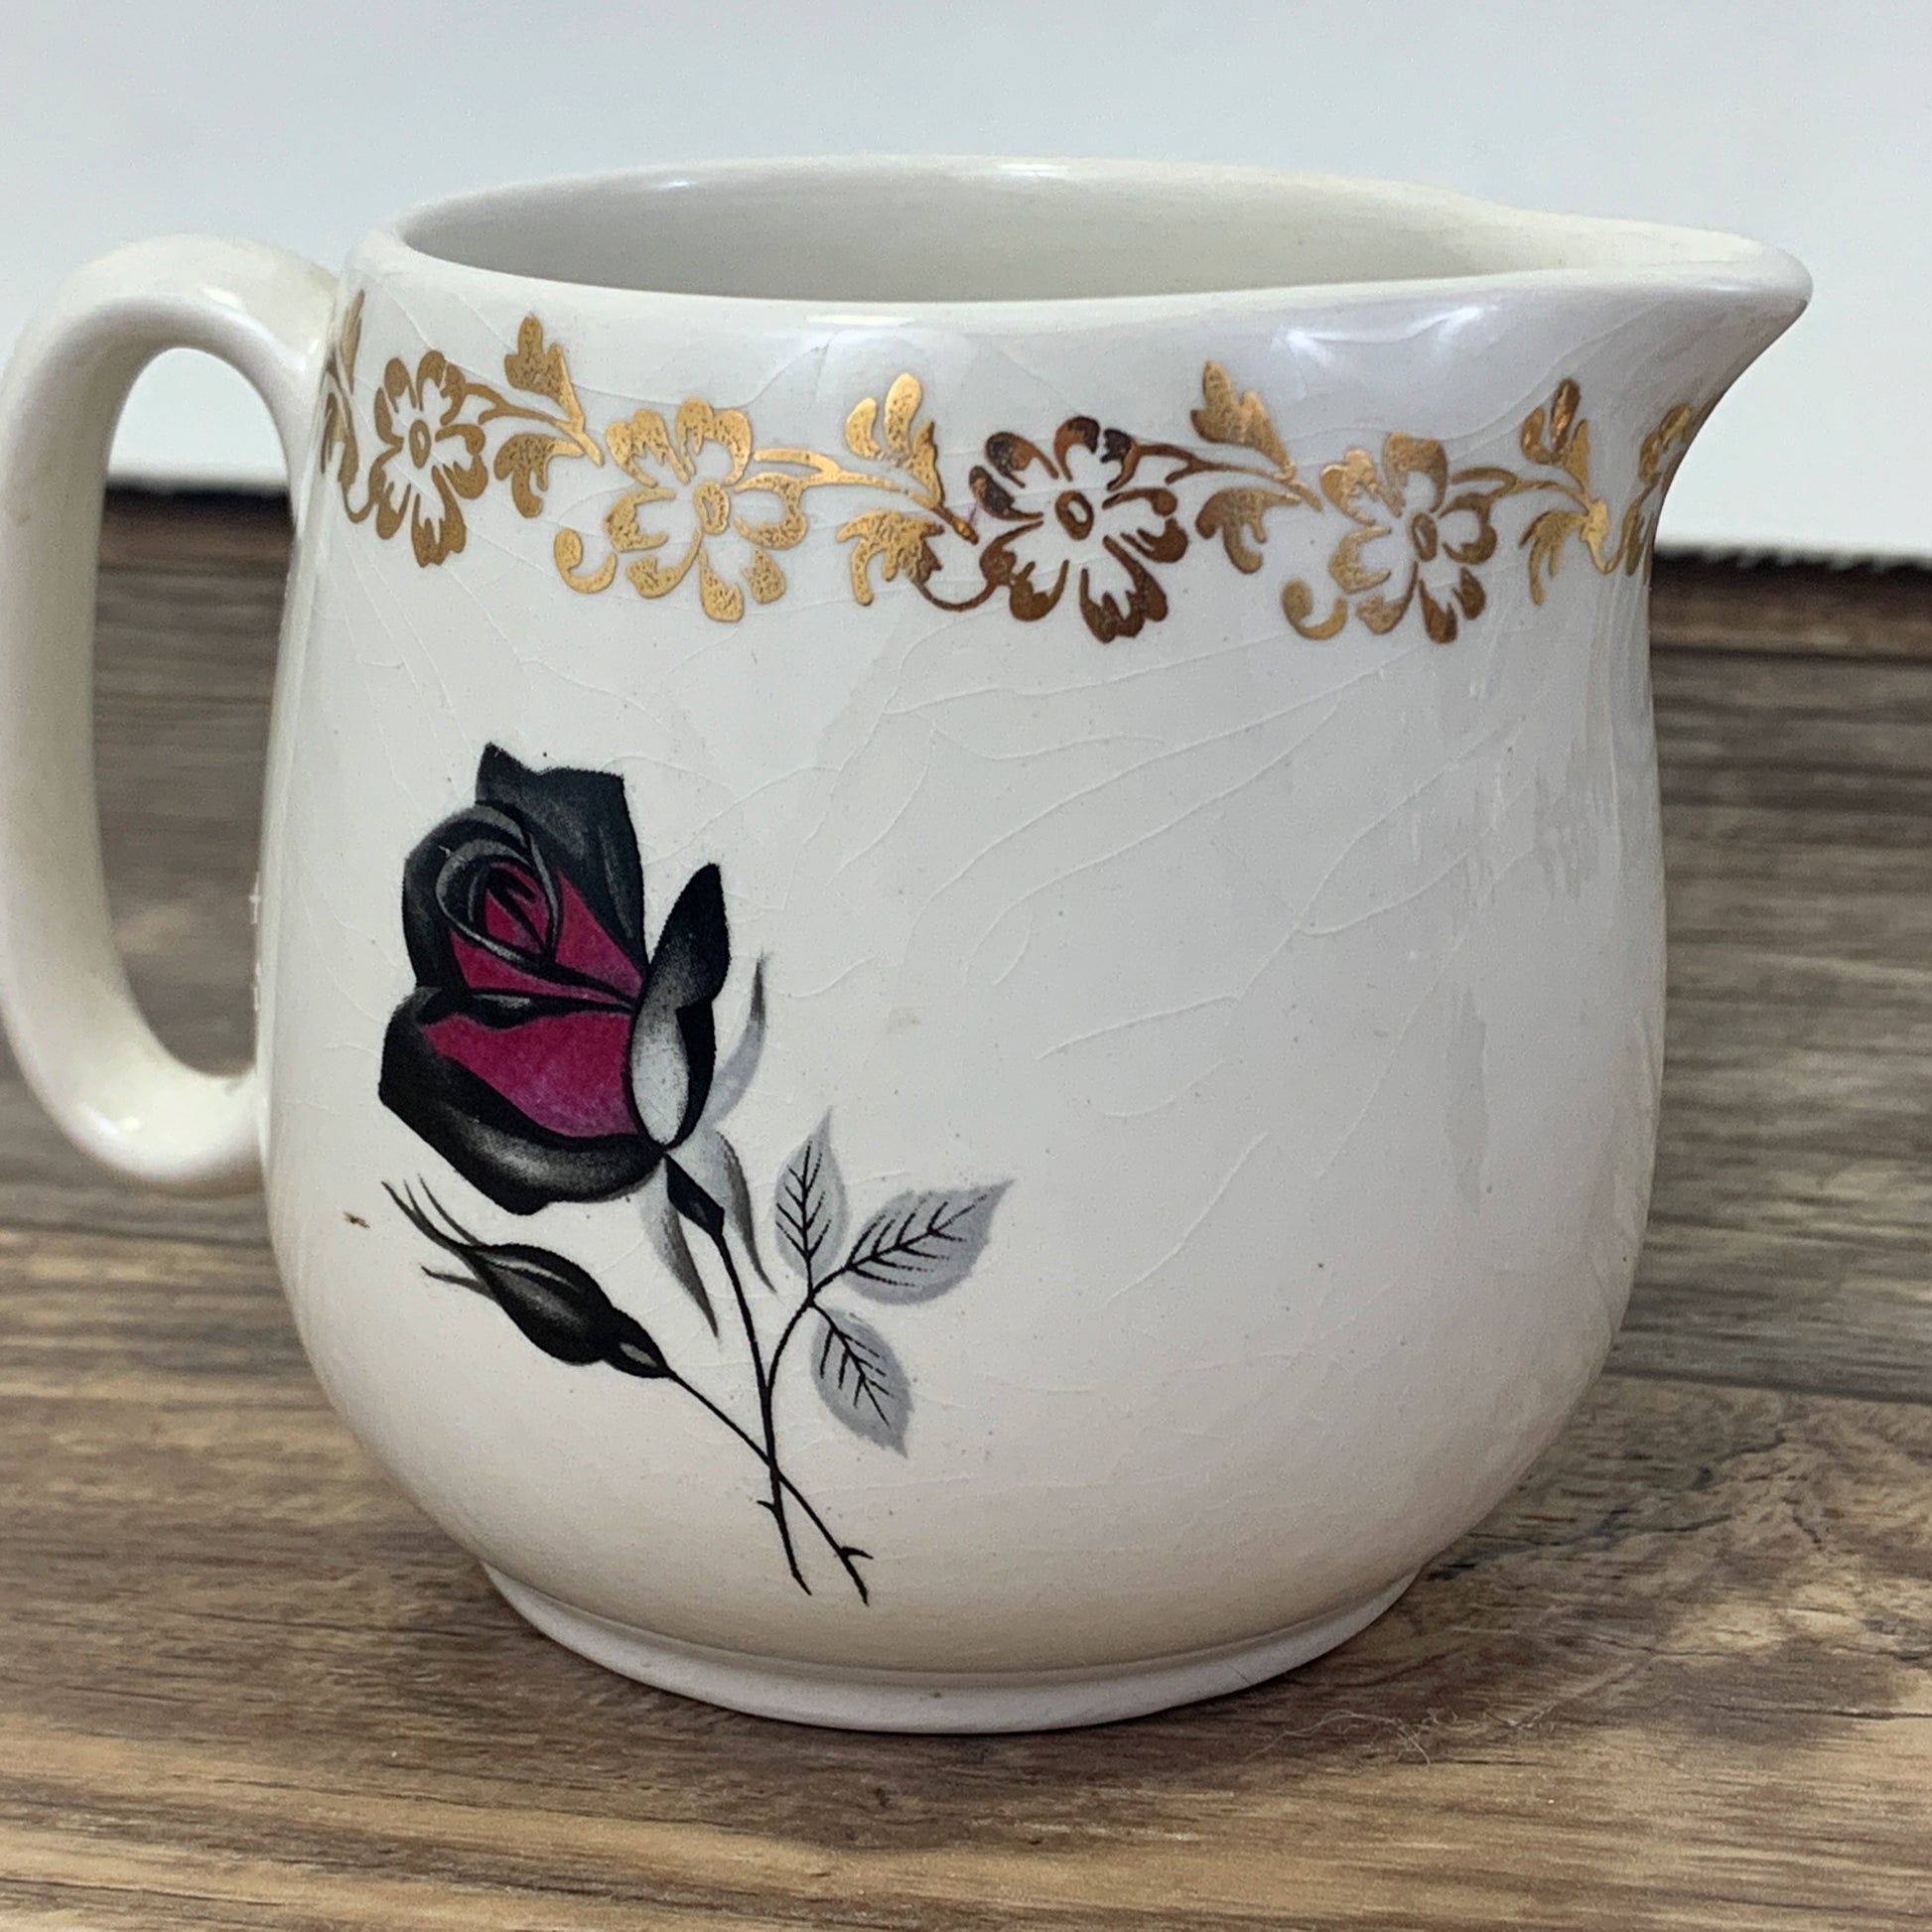 Vintage Creamer with Black and Red Rose